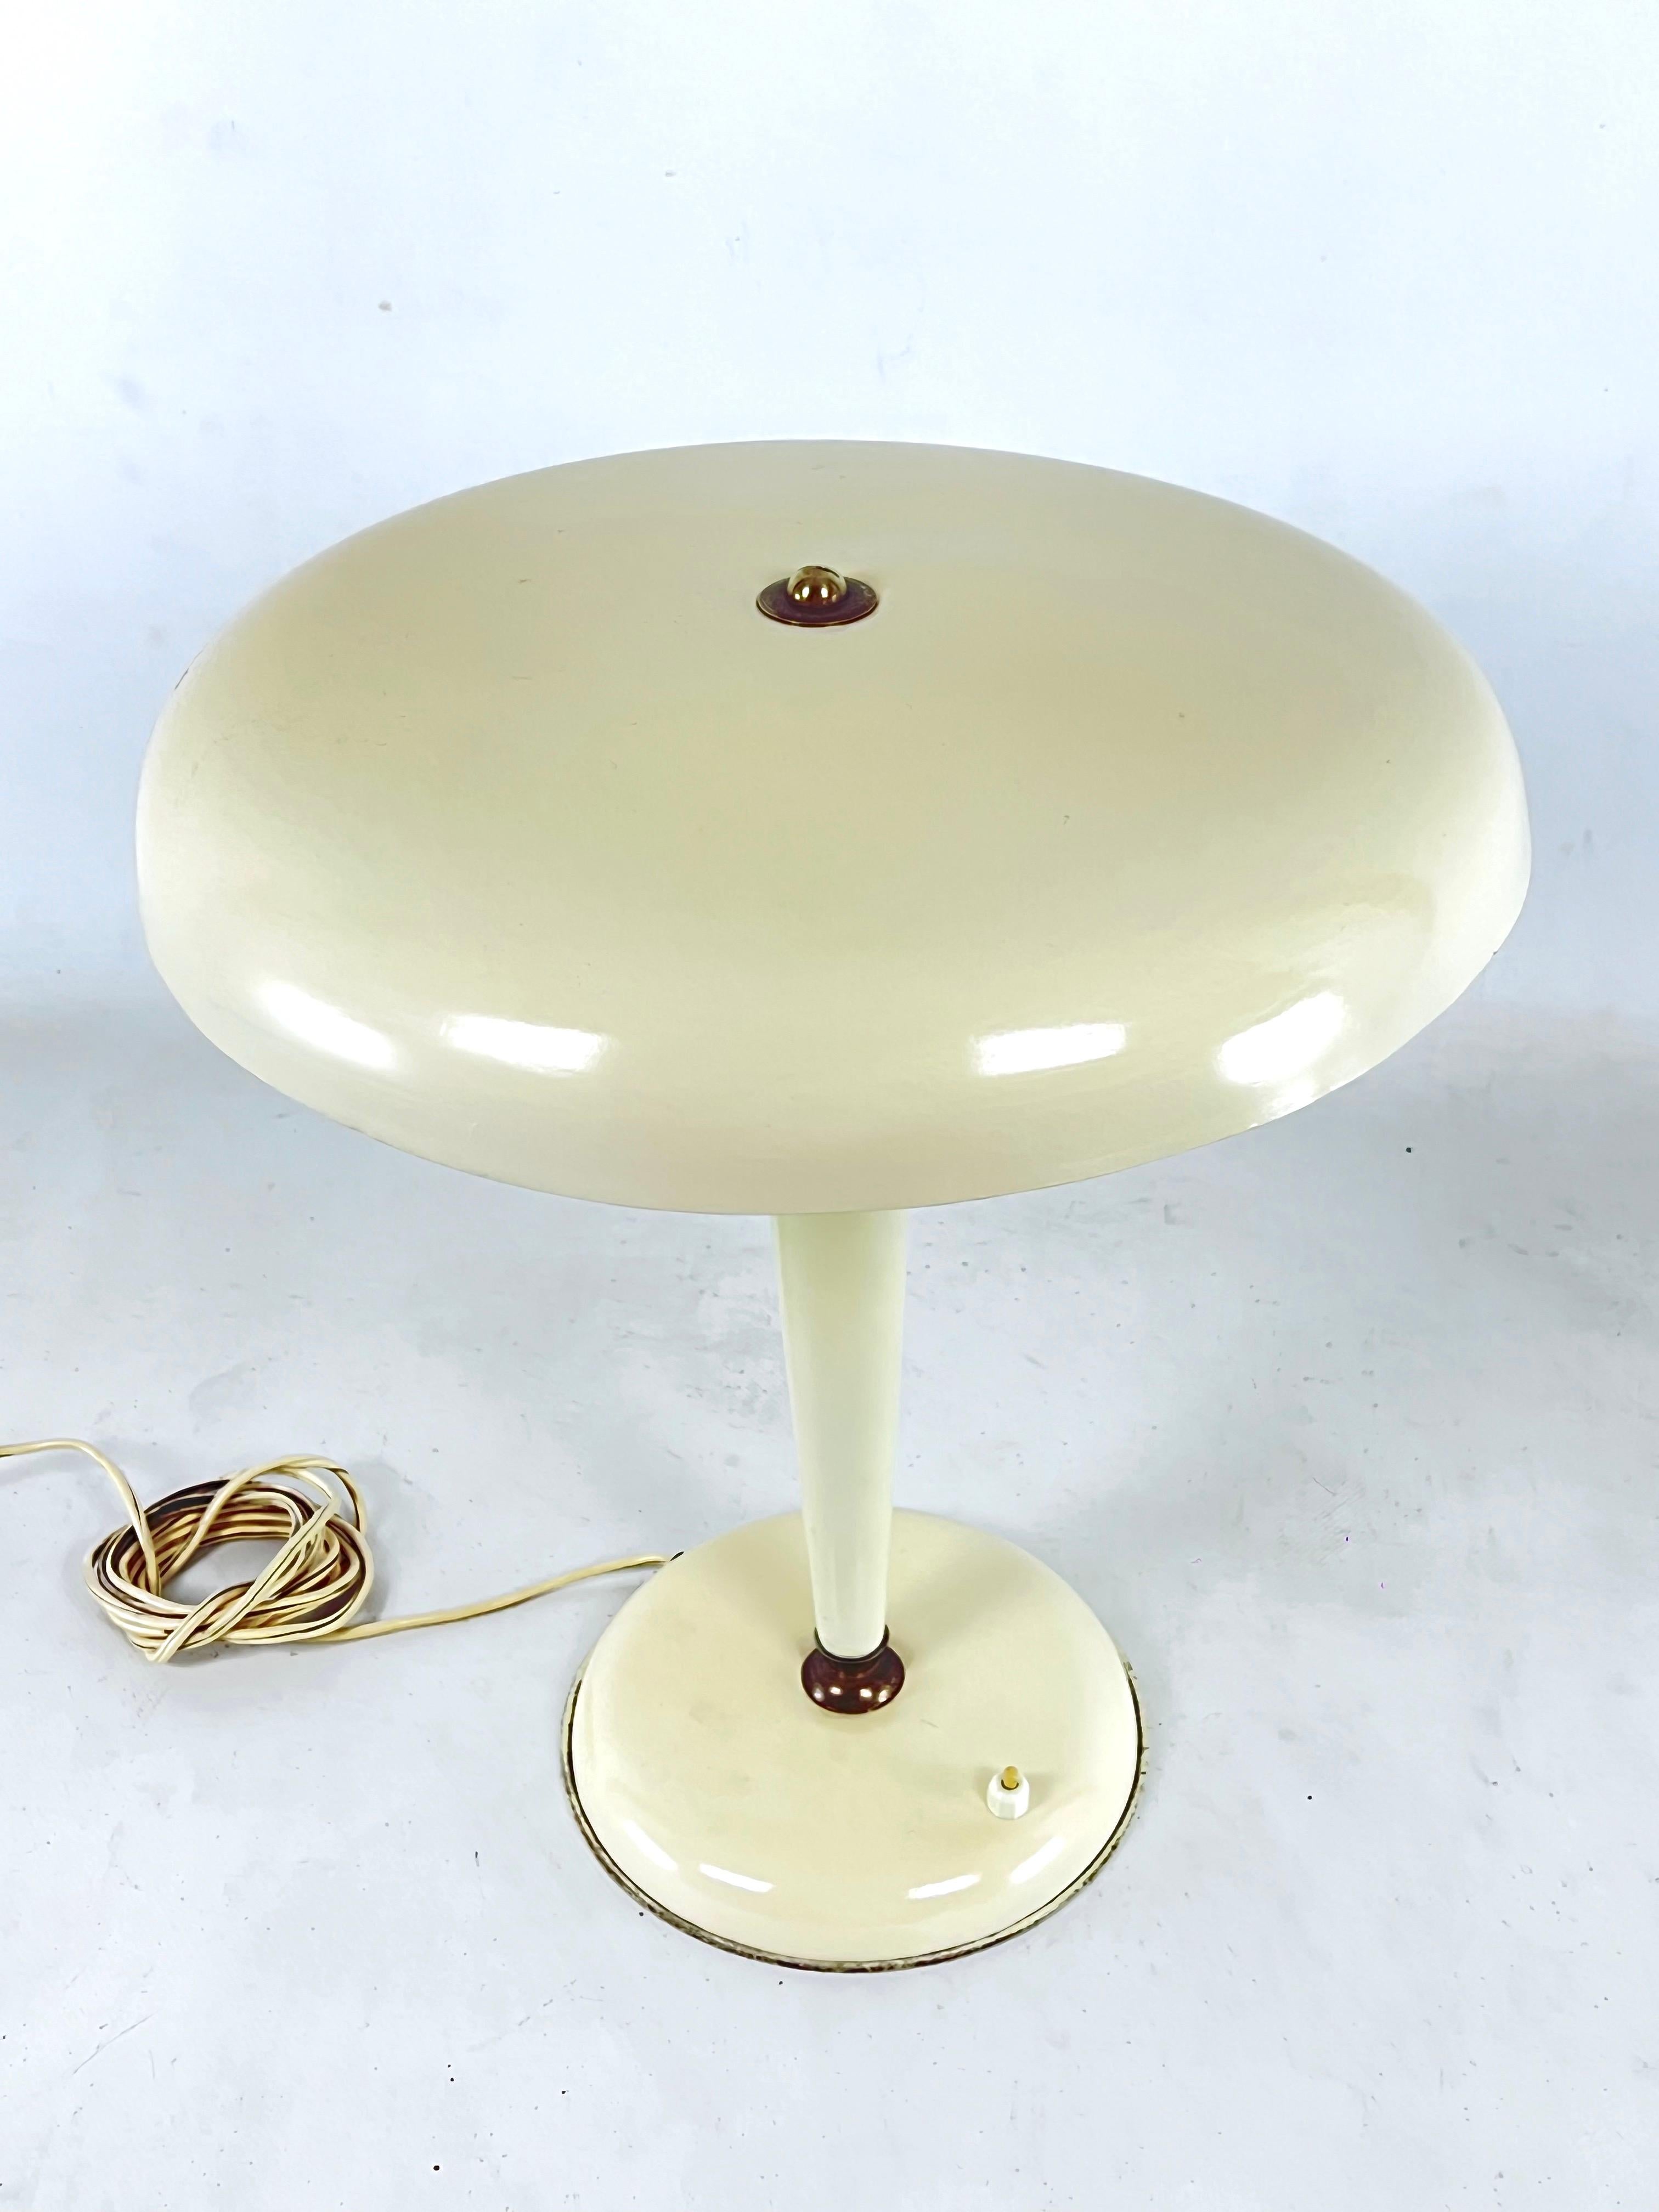 Midcentury Italian Ministerial Desk Lamp in Brass and Ivory Lacquer, Italy, 1950 In Good Condition For Sale In Catania, CT